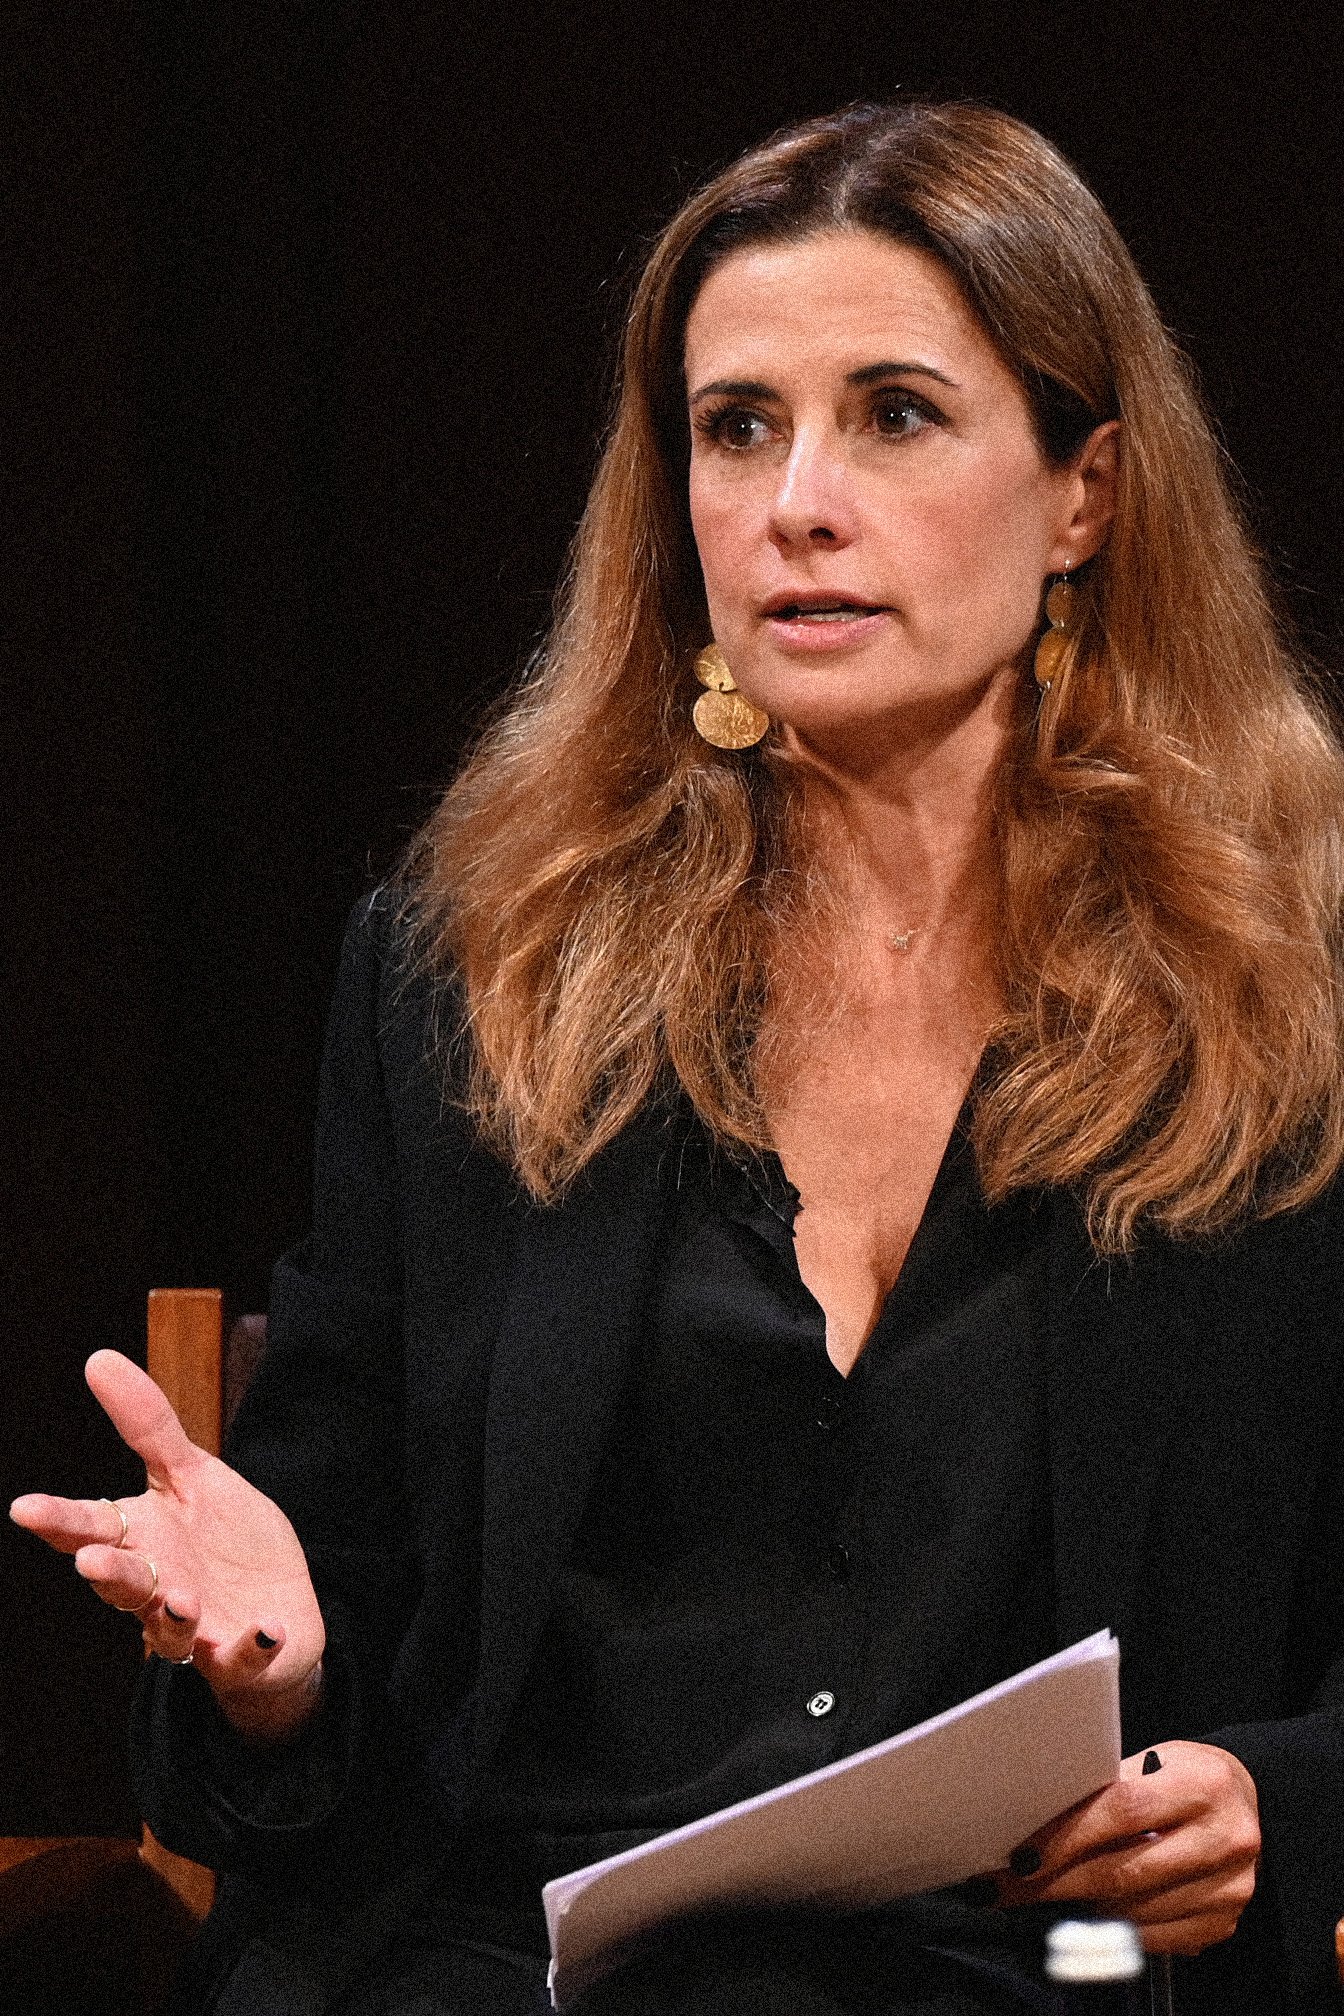 Livia Firth, Founder of Eco Age